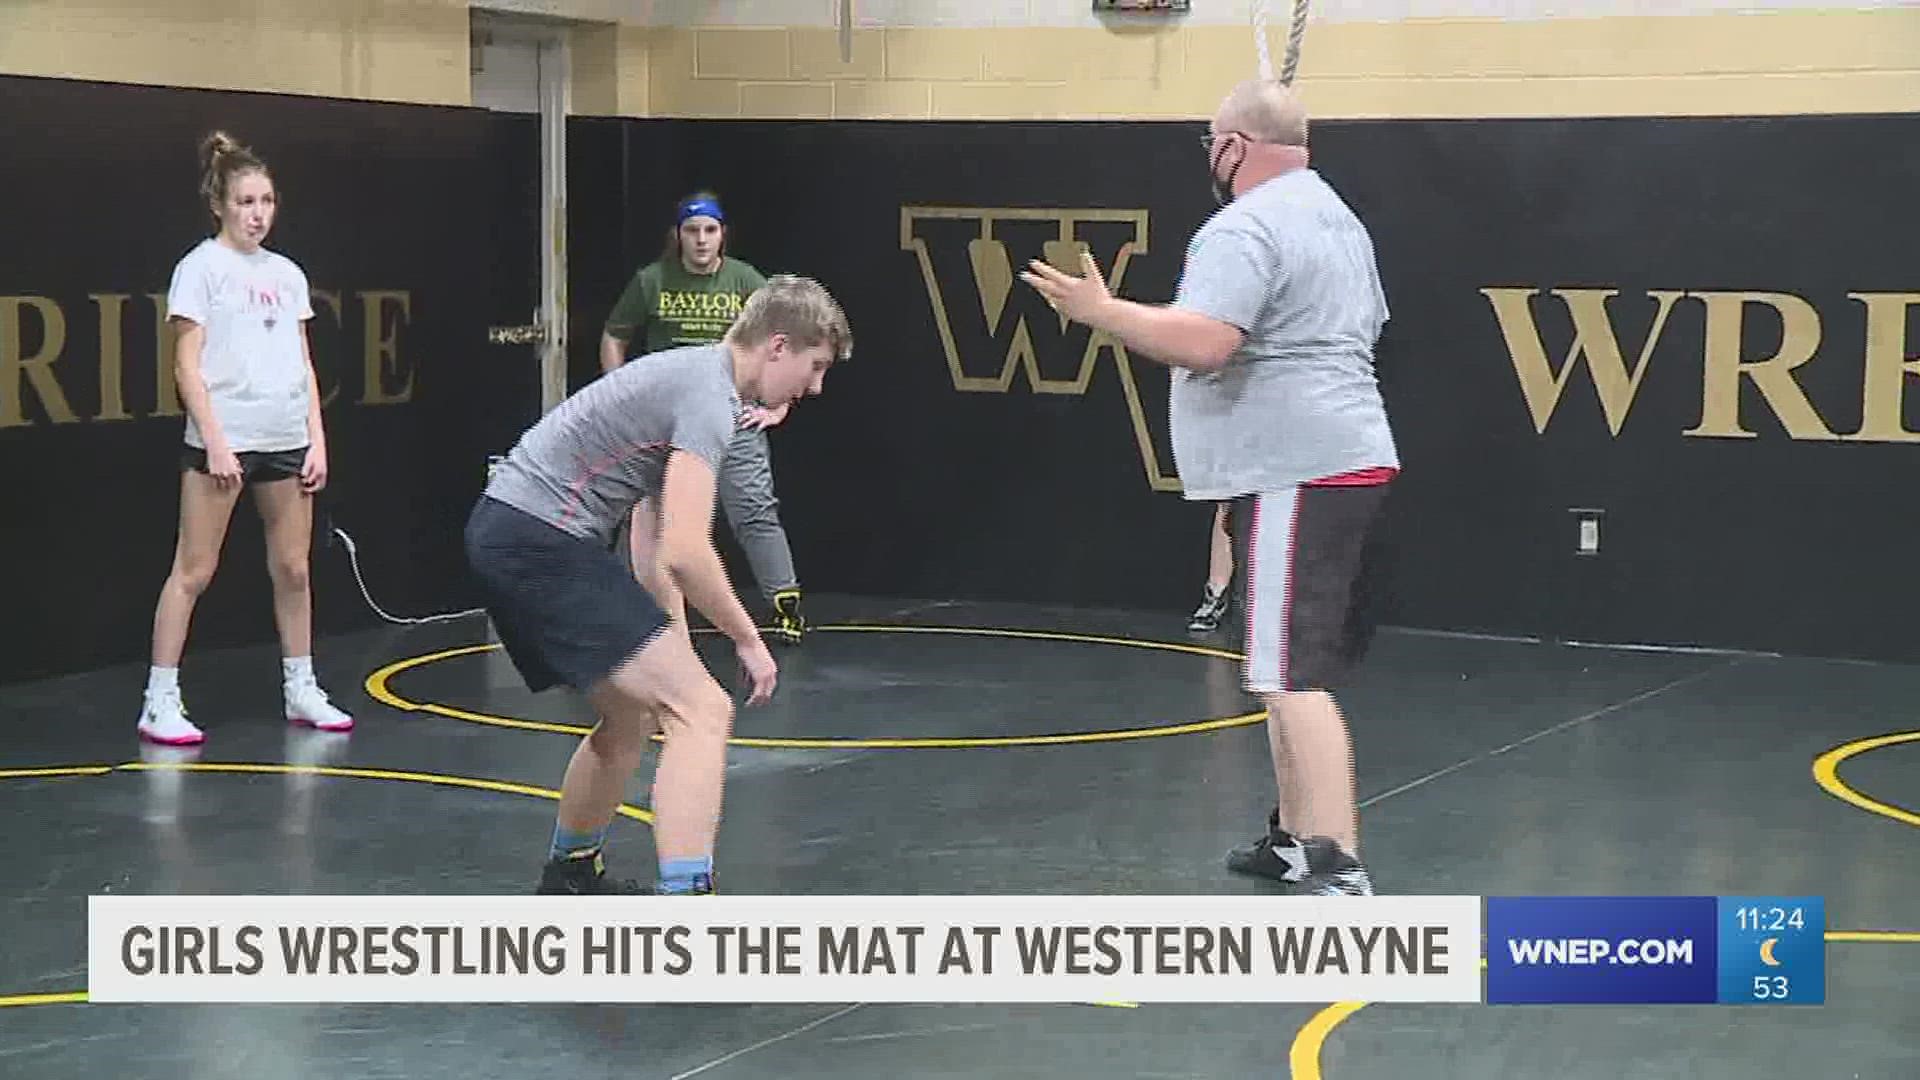 In a sport typically deemed for boys, Western Wayne has expanded its wrestling program to include a girls' team and the interest is already there.